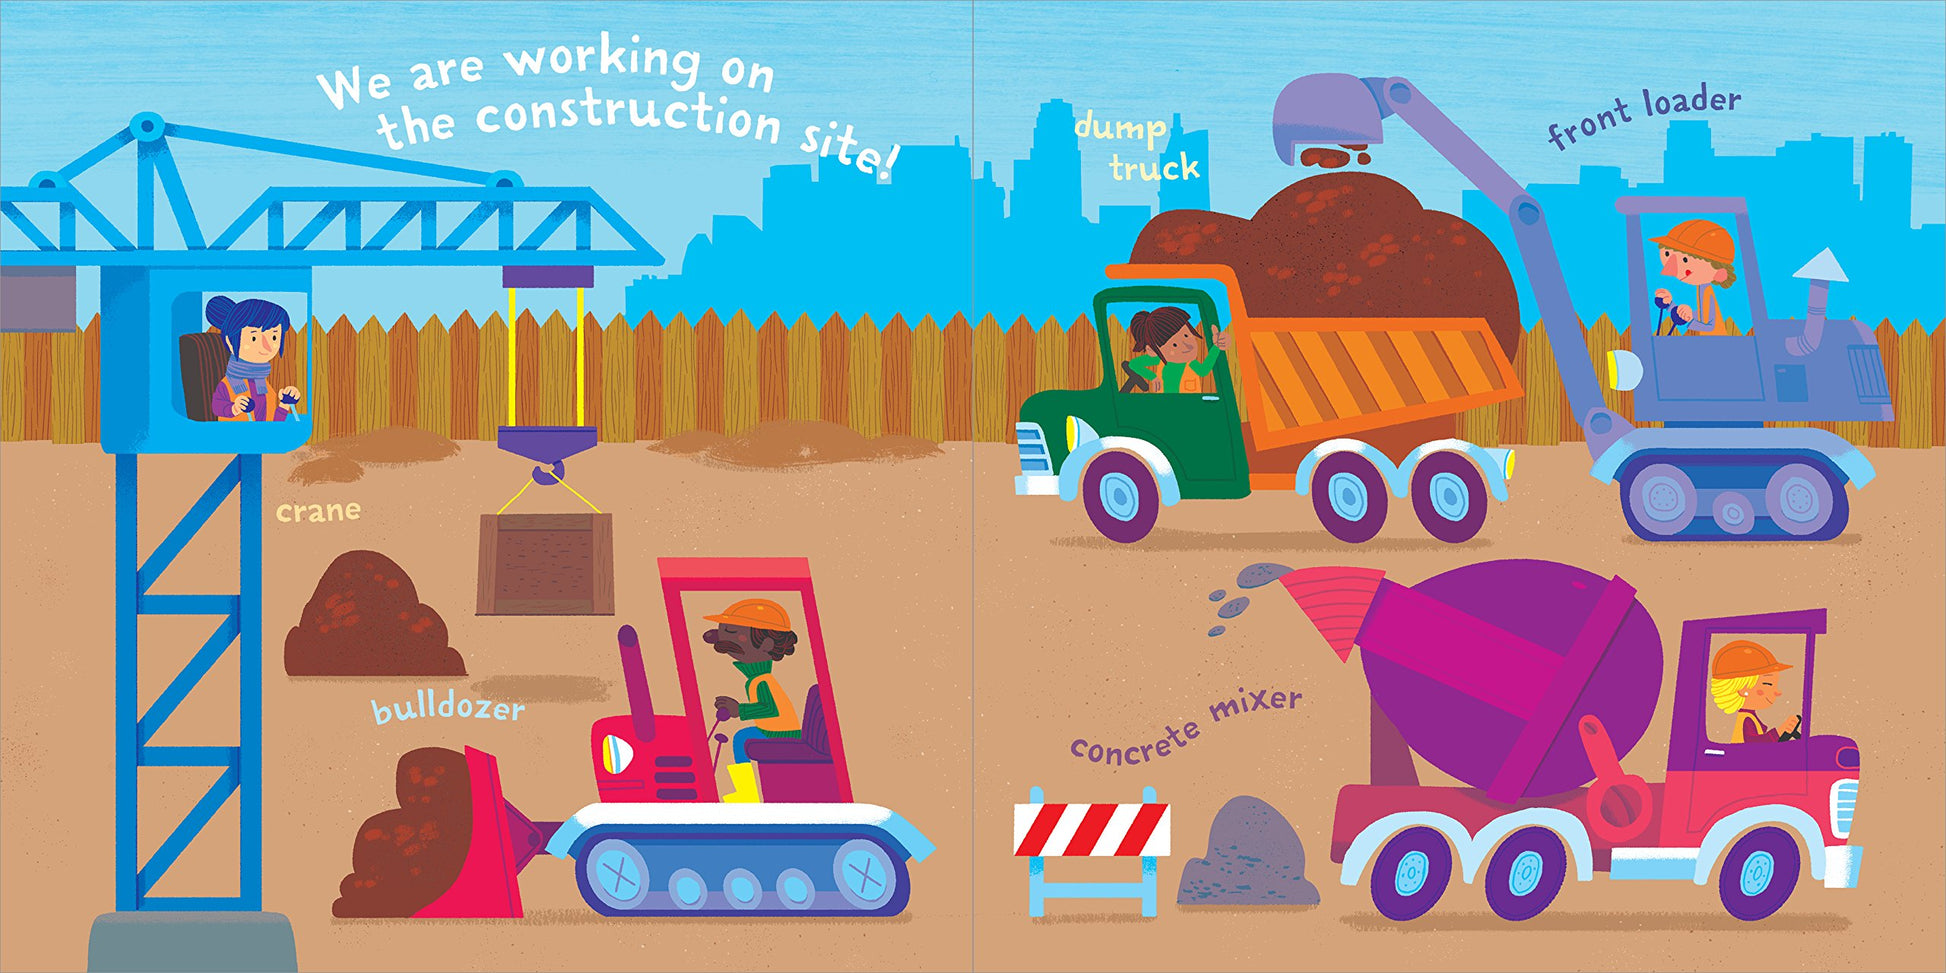 another set of pages with illustration of different kinds of construction vehicles on a worksite